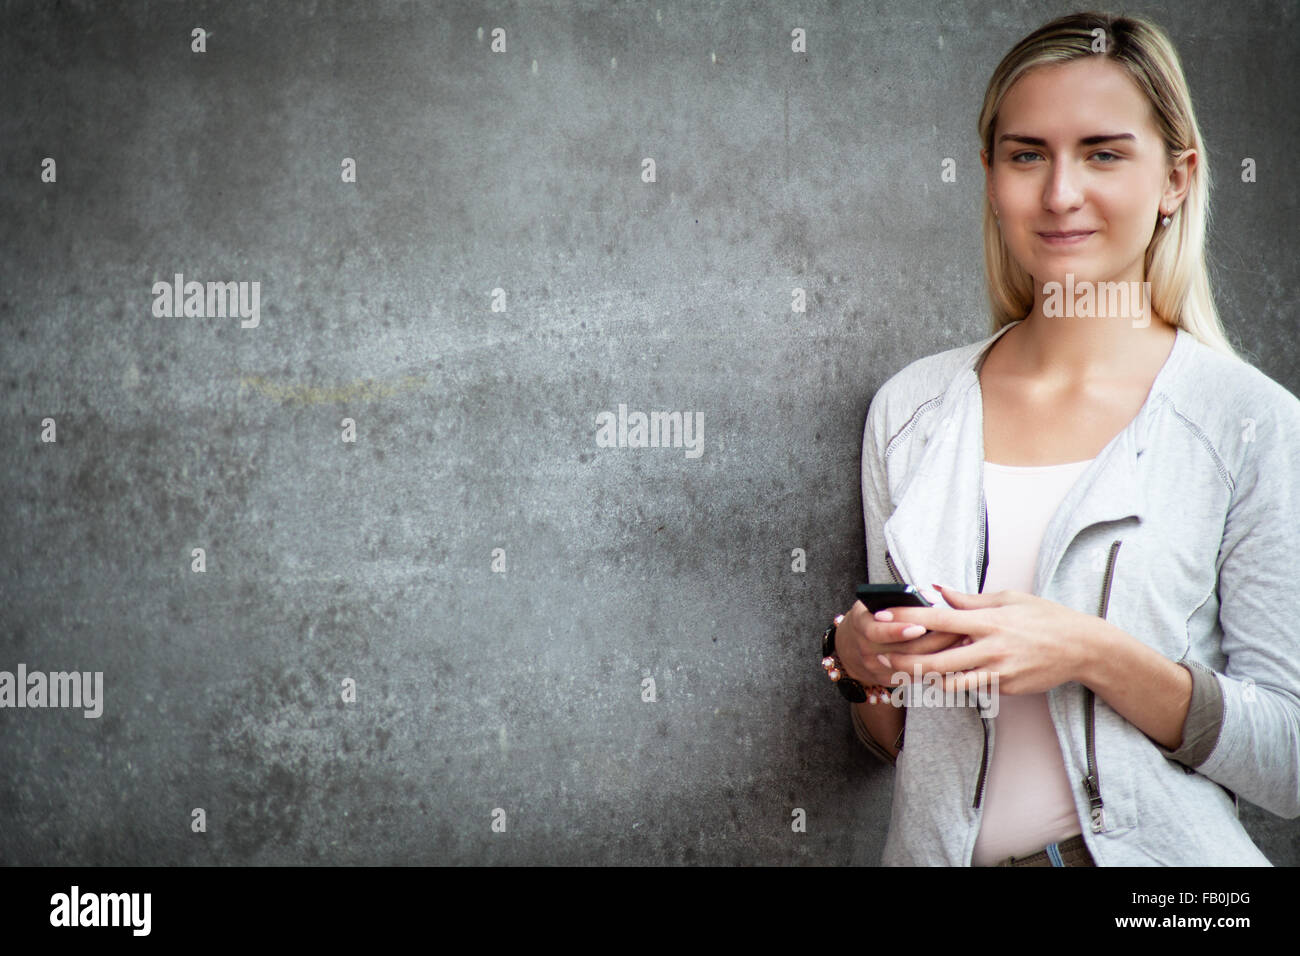 Attractive young woman using smart phone. Stock Photo